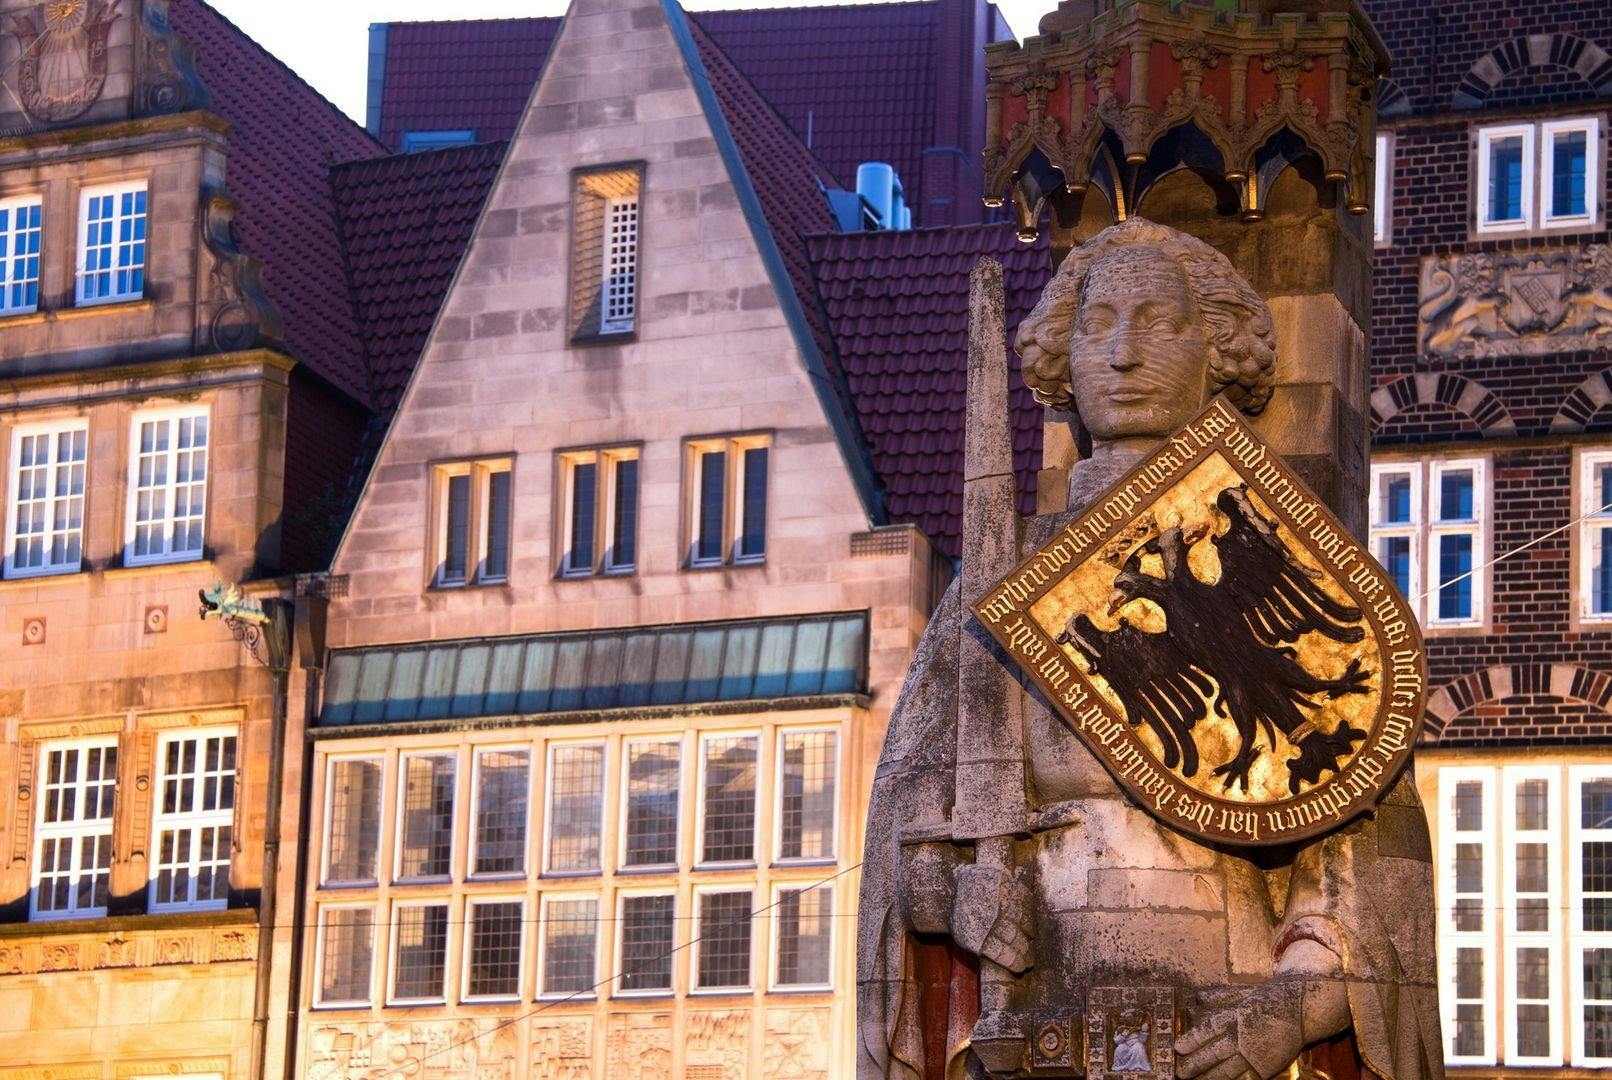 Self-guided historical walk through Bremen's Old Town Musement